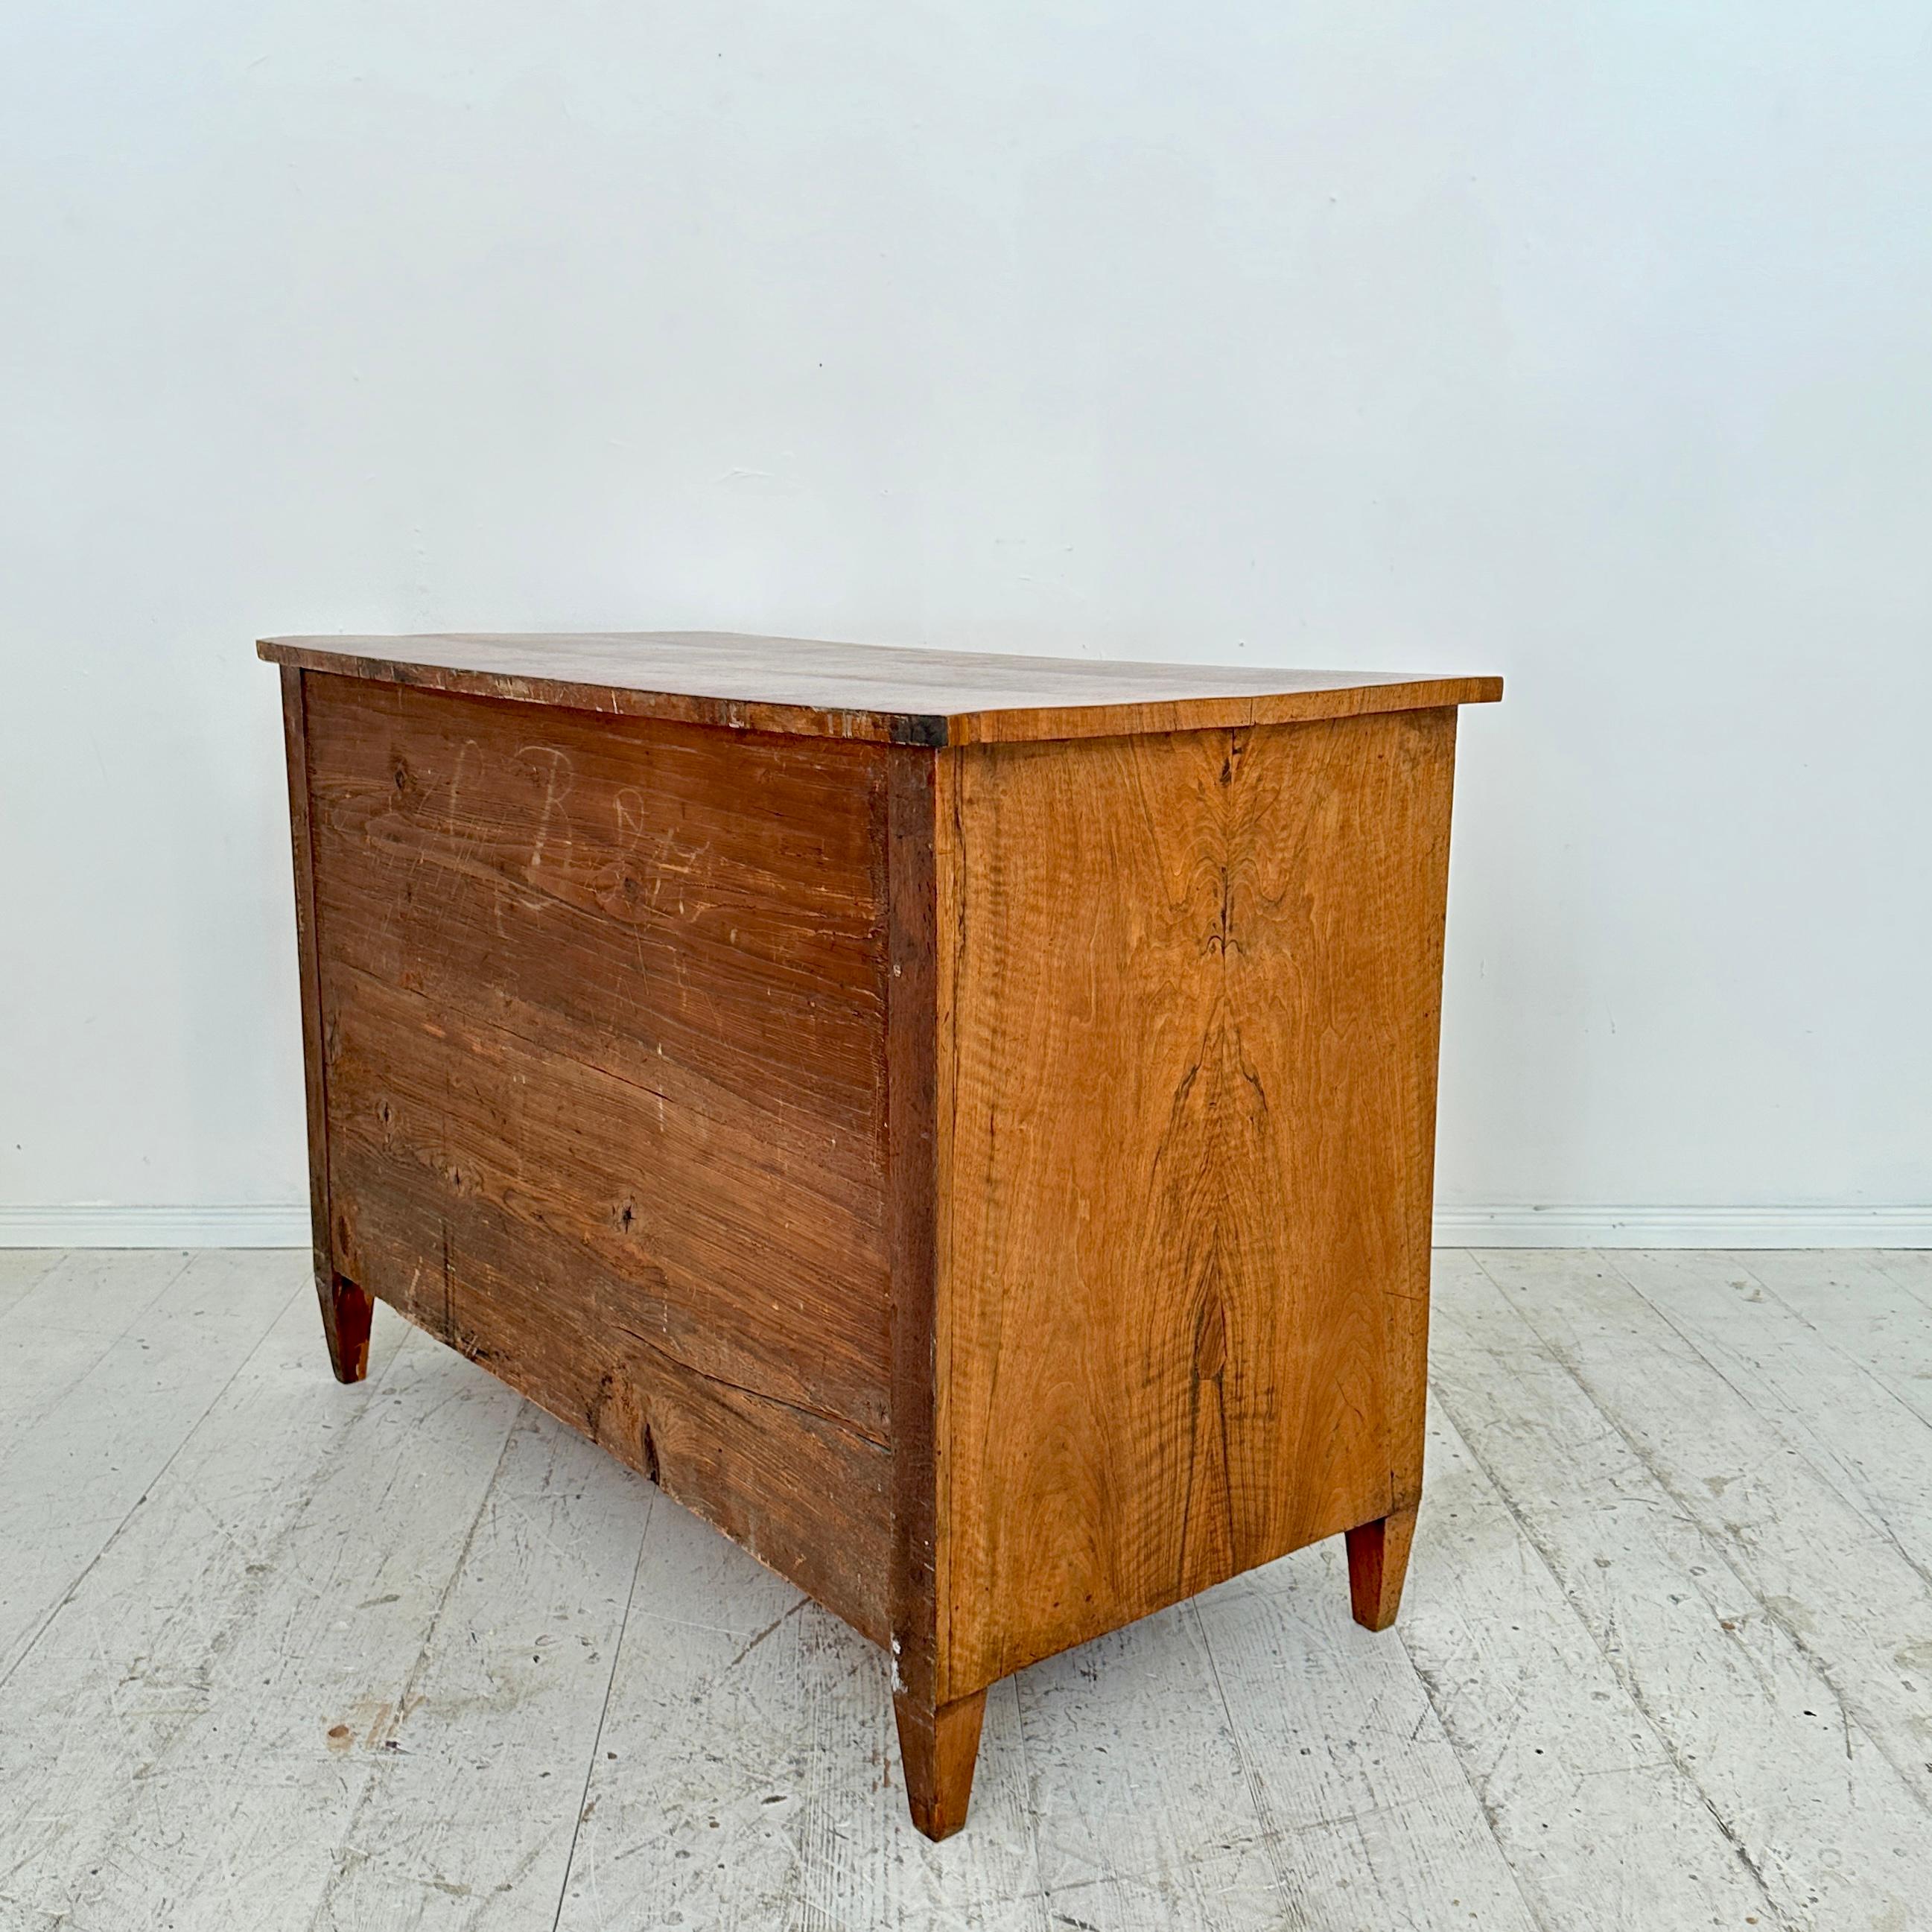 19th Century German Biedermeier Chest of Drawers in Walnut with 3 Drawers, 1820 For Sale 8